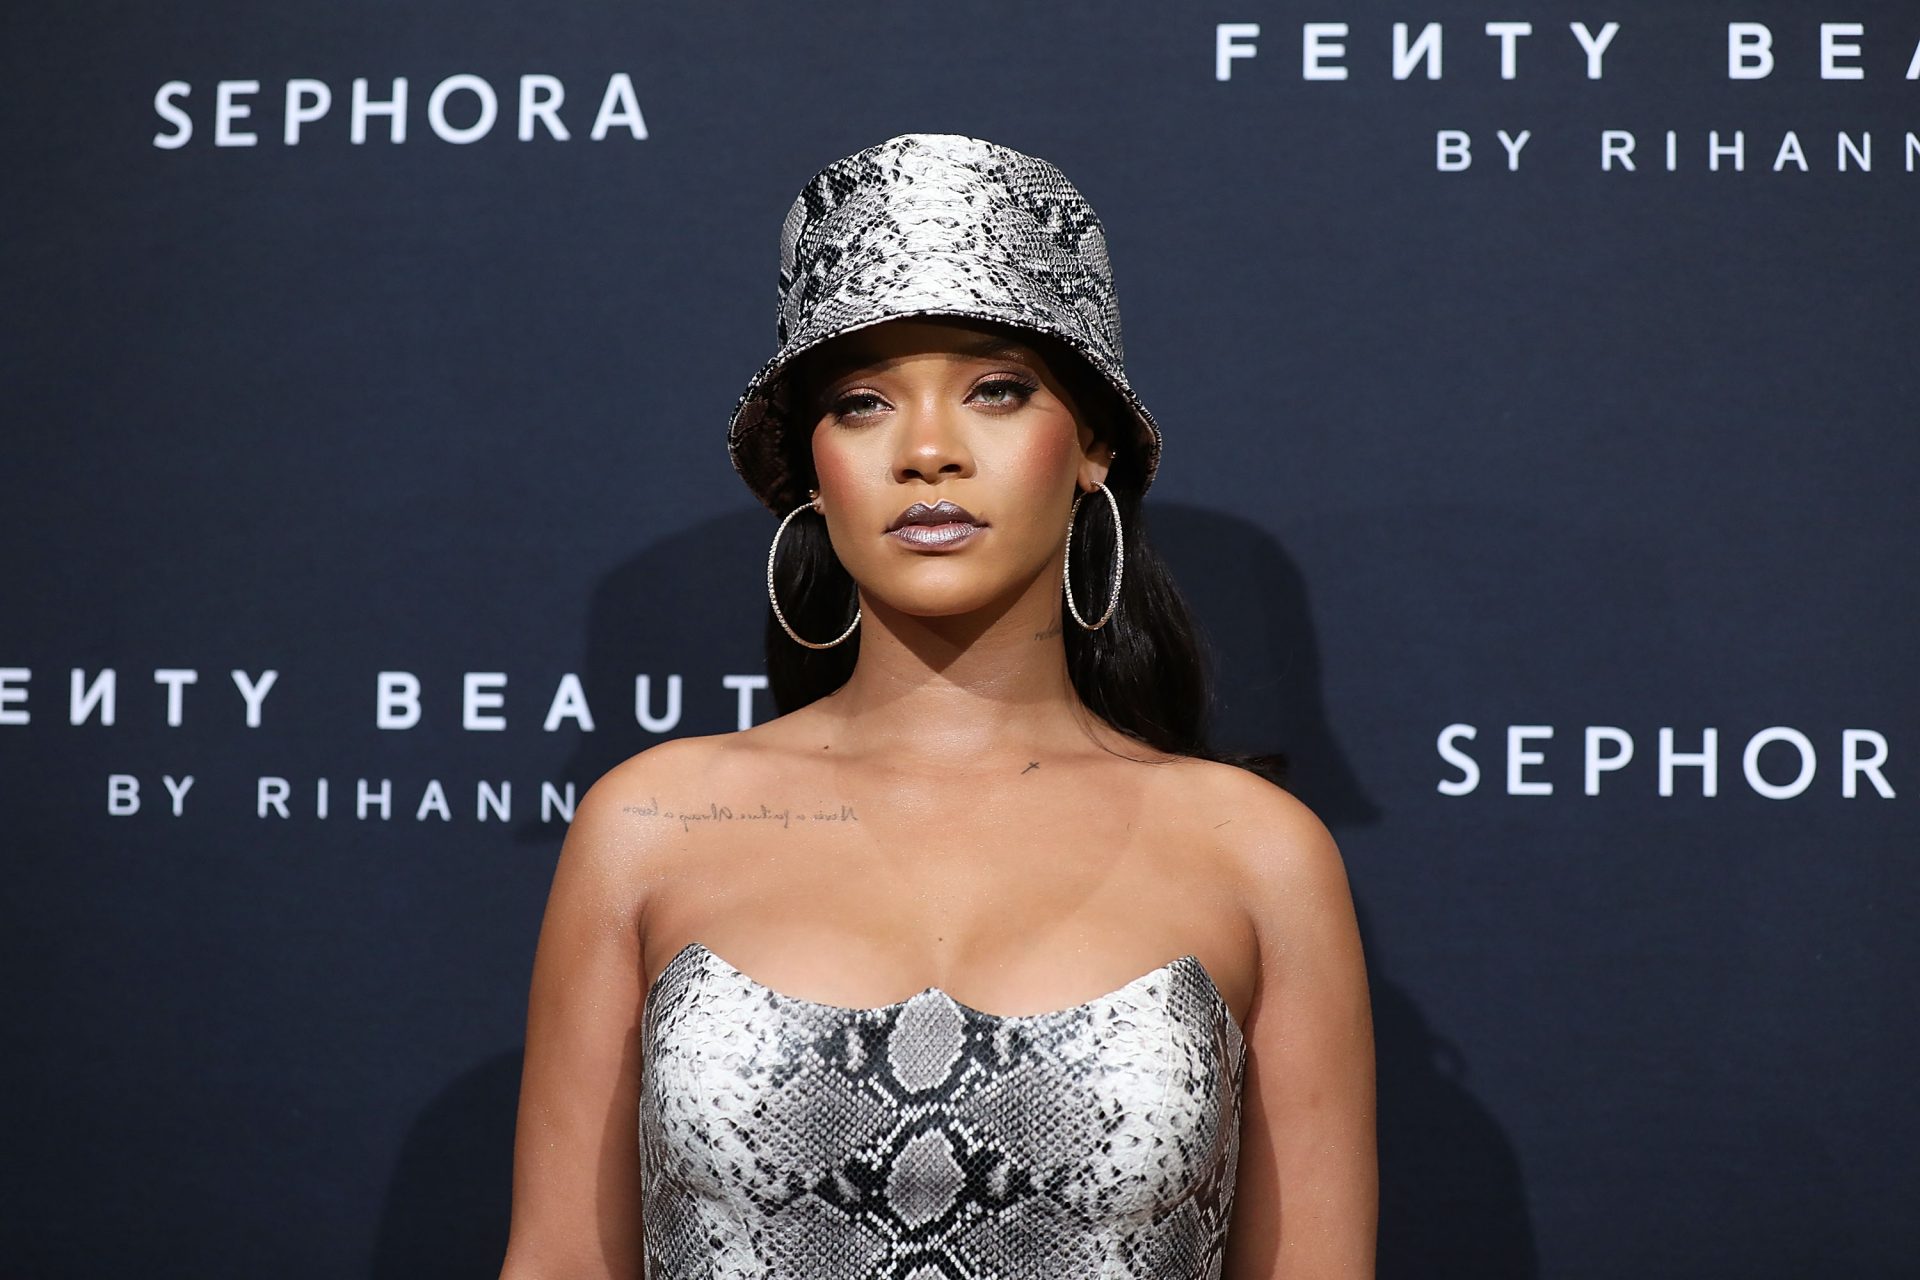 Fenty Skin is disrupting the skincare industry–here's how